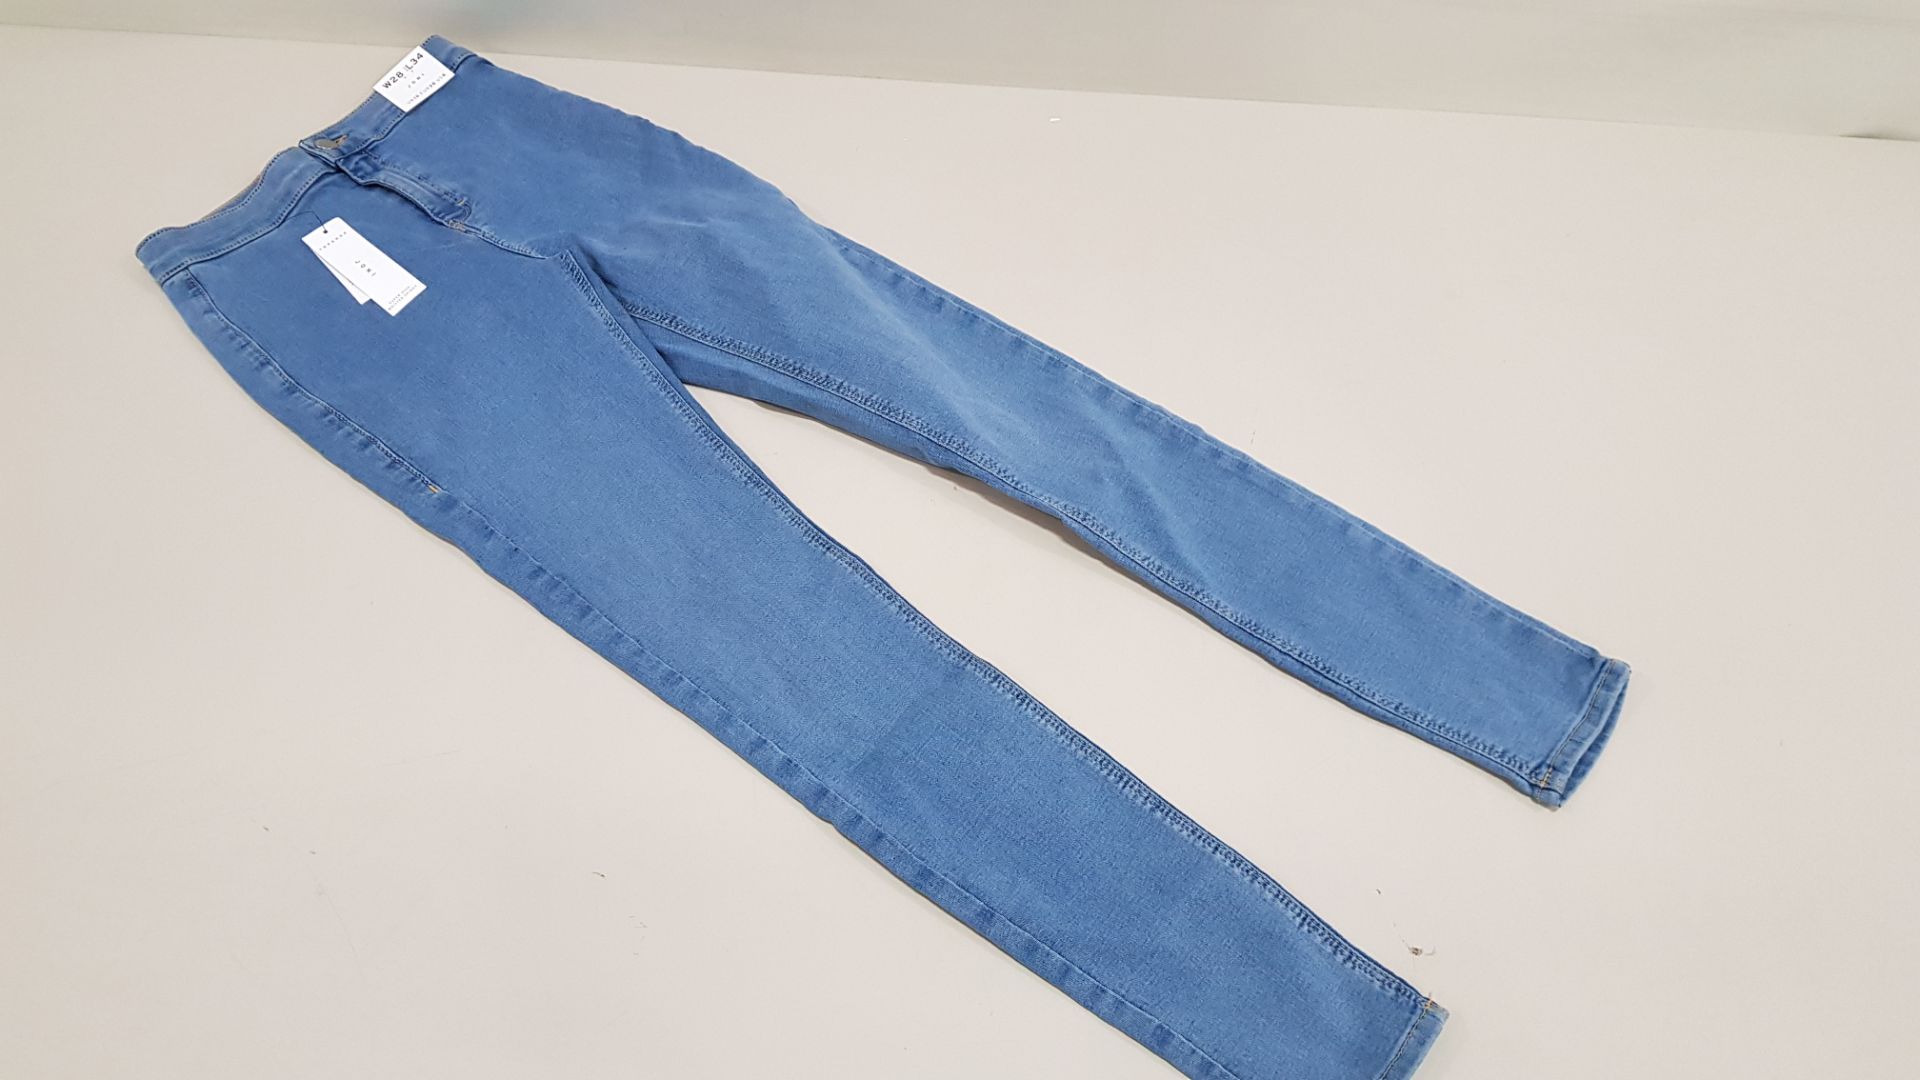 15 X BRAND NEW TOPSHOP JONI SUPER HIGH WAISTED SKINNY JEANS UK SIZE 10 RRP £36.00 (TOTAL RRP £540.